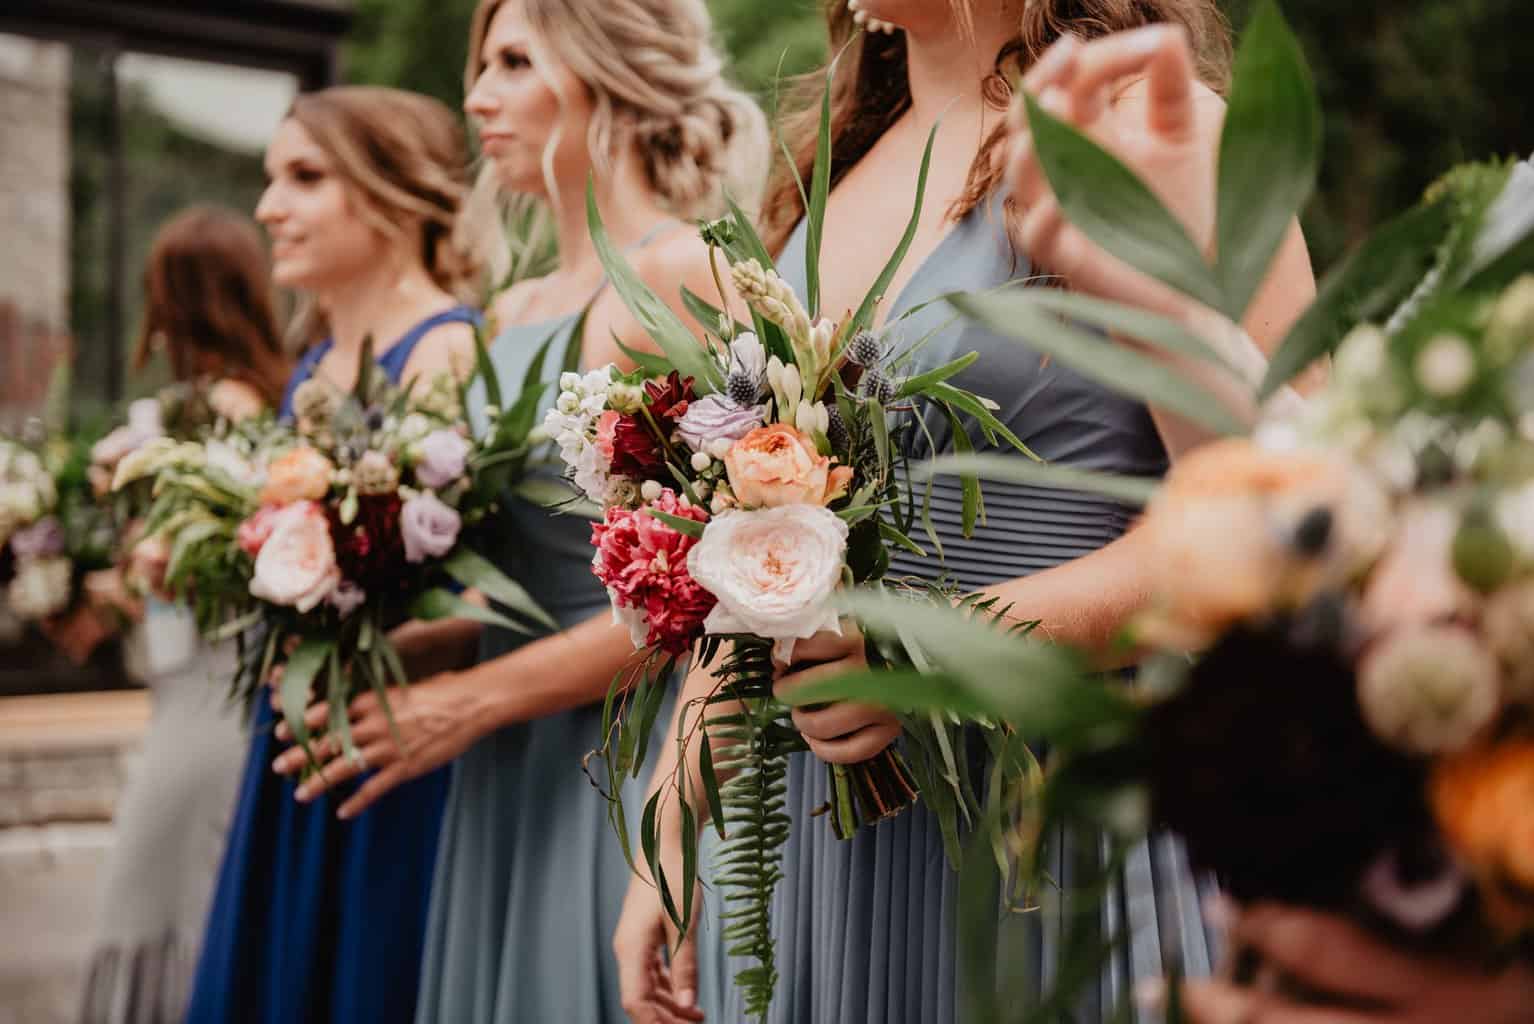 Free Selective Focus Photography of Women Holding Wedding Flowers Stock Photo